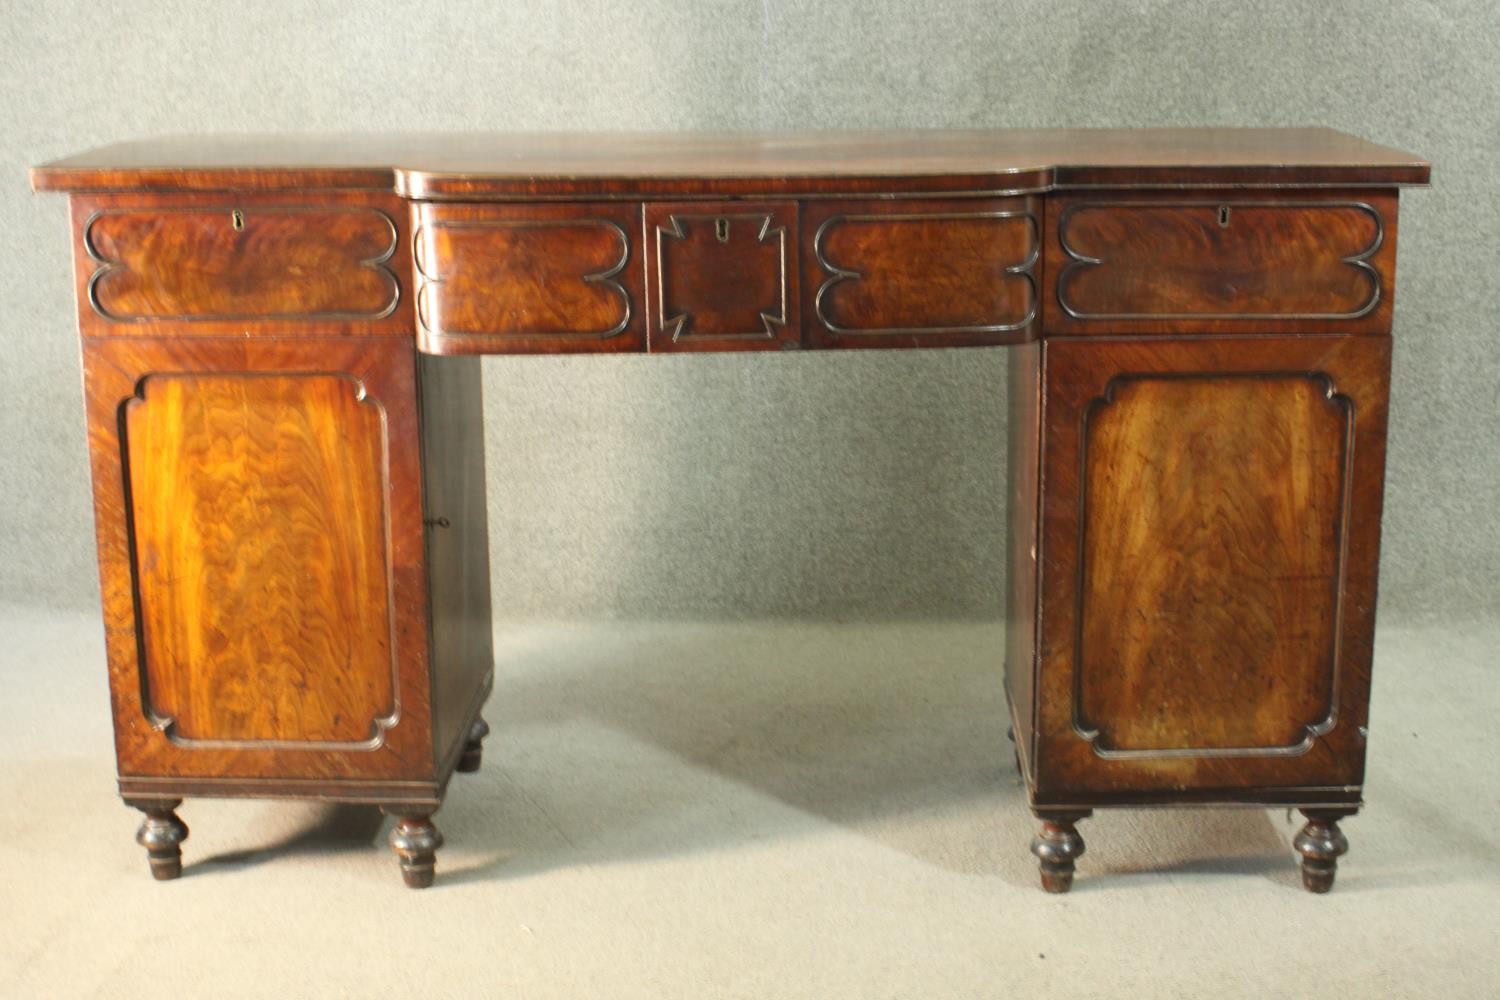 A Regency mahogany bow fronted pedestal sideboard, the central drawer fitted for cutlery, flanked by